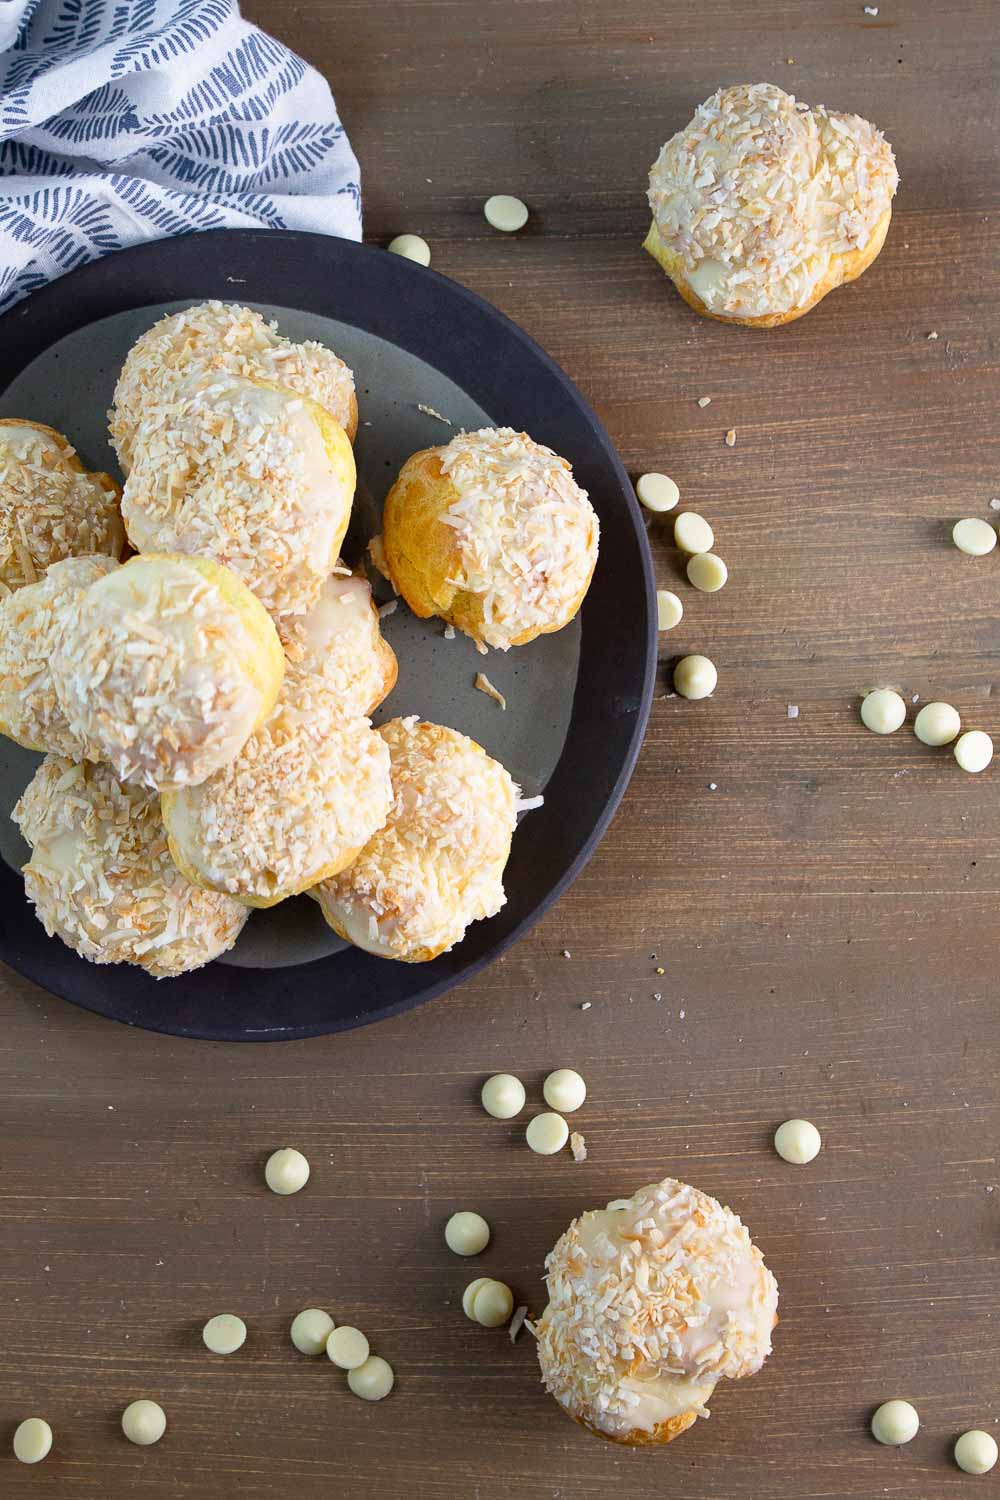 If you love cream puffs, put these orange coconut cream puffs on your to-do list. This homemade cream puffs recipe is made with a classic French choux pastry dough and filled with orange coconut cream and drizzled with white chocolate ganache. Perfect for your sweet tooth cravings.